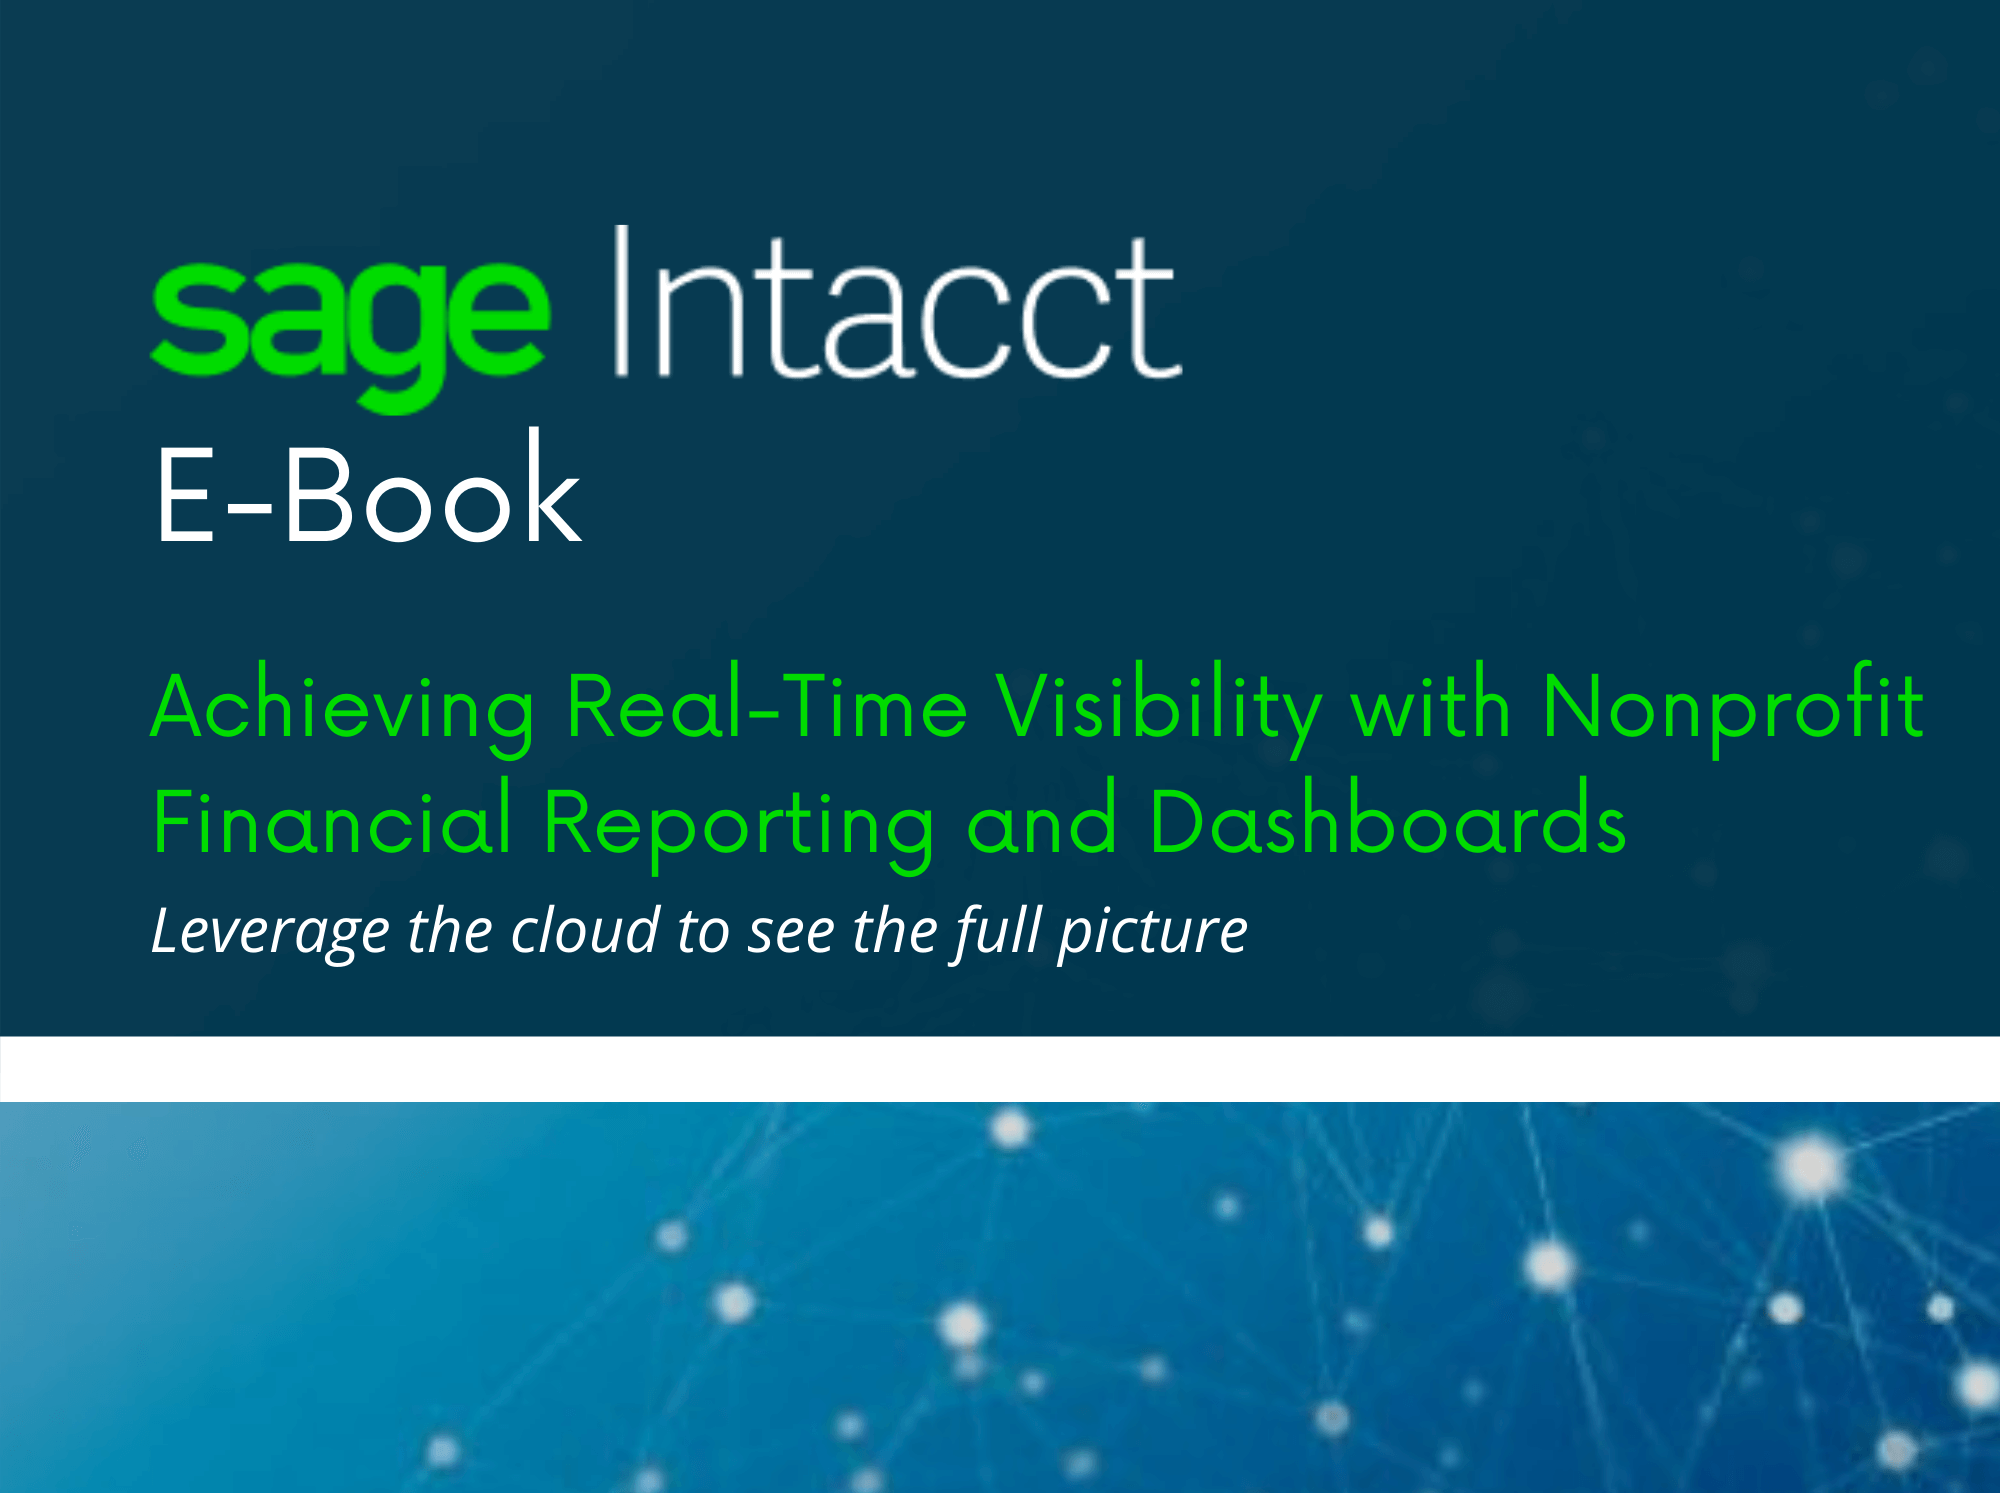 Sage Intacct E-Book: Achieving Real-Time Visibility with Nonprofit Financial Reporting and Dashboards